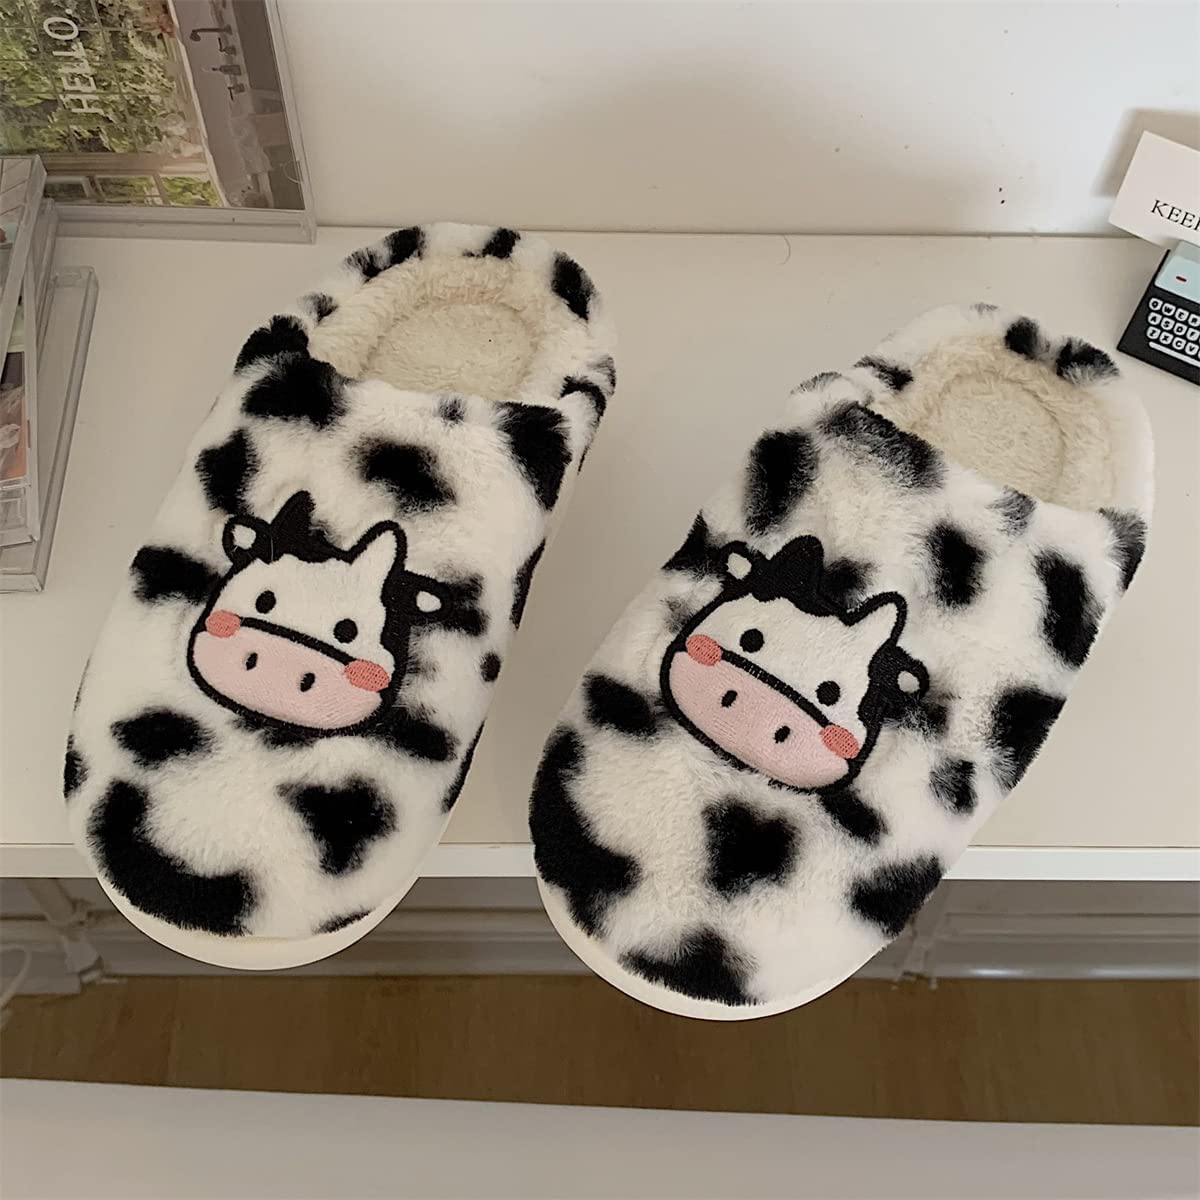 YCYL Kawaii Fuzzy Cow Slippers,Women's Warm Cozy and Lovely Animal Non-Skid Floor Slippers,Funny Cartoon Milk Cow Slippers for Adults Girls (White,38-39)